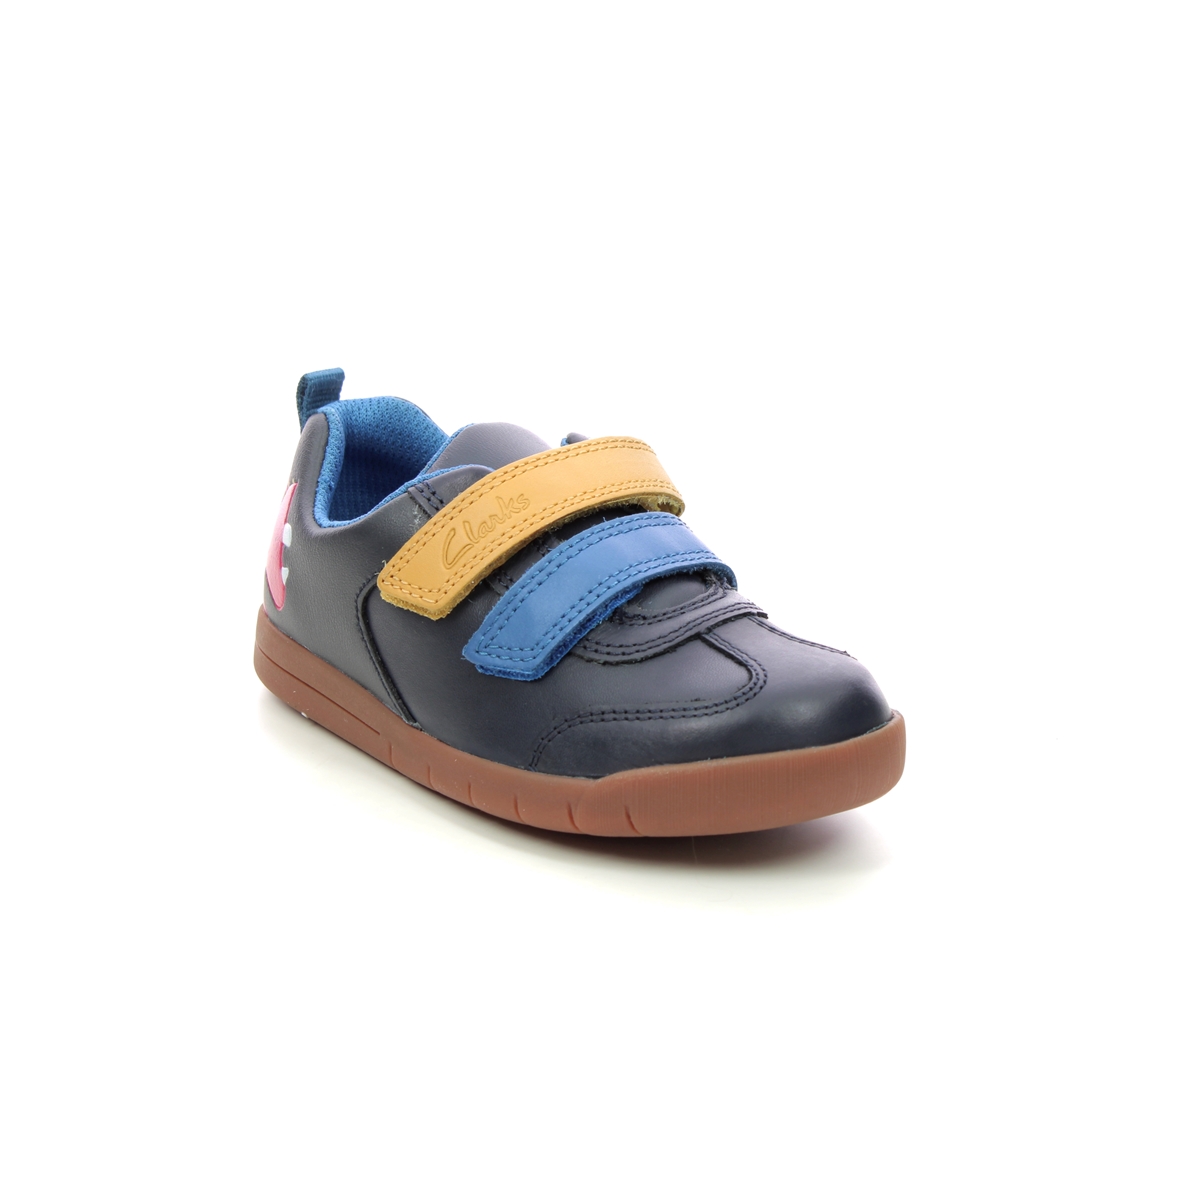 Clarks Den Play K Navy Leather Kids Boys Toddler Shoes 7158-96F in a Plain Leather in Size 8